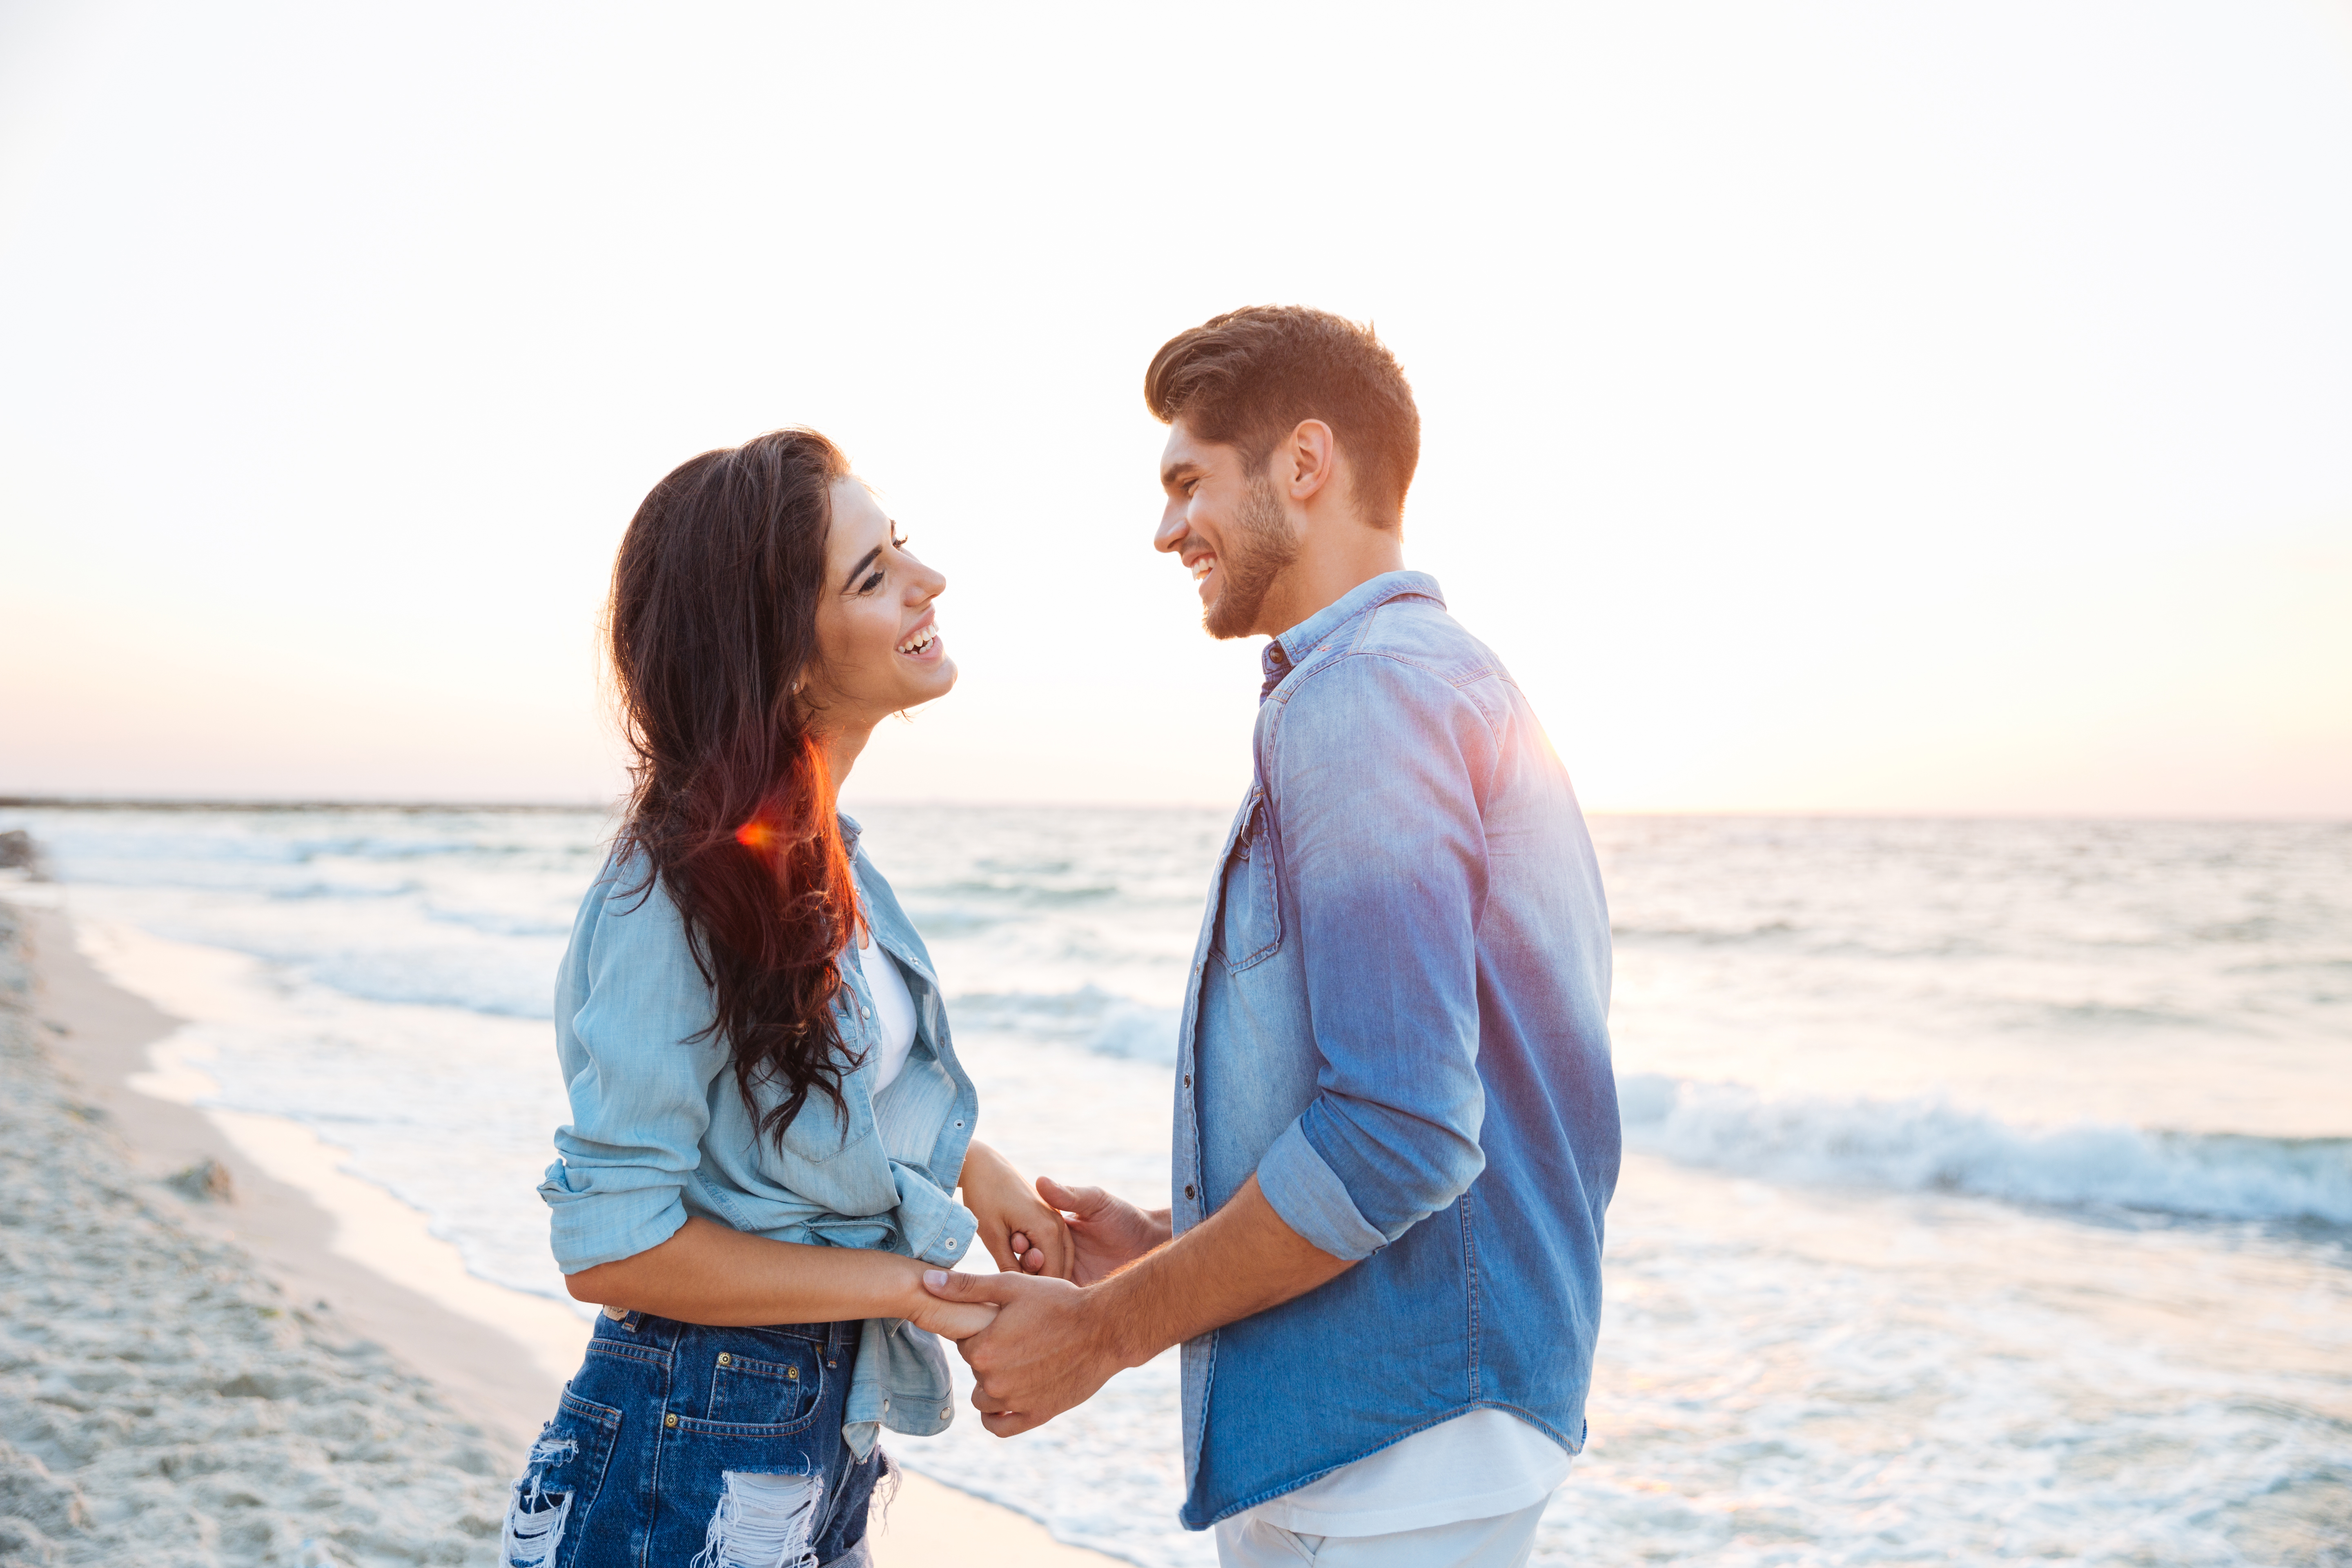 A happy couple holding hands | Source: Shutterstock